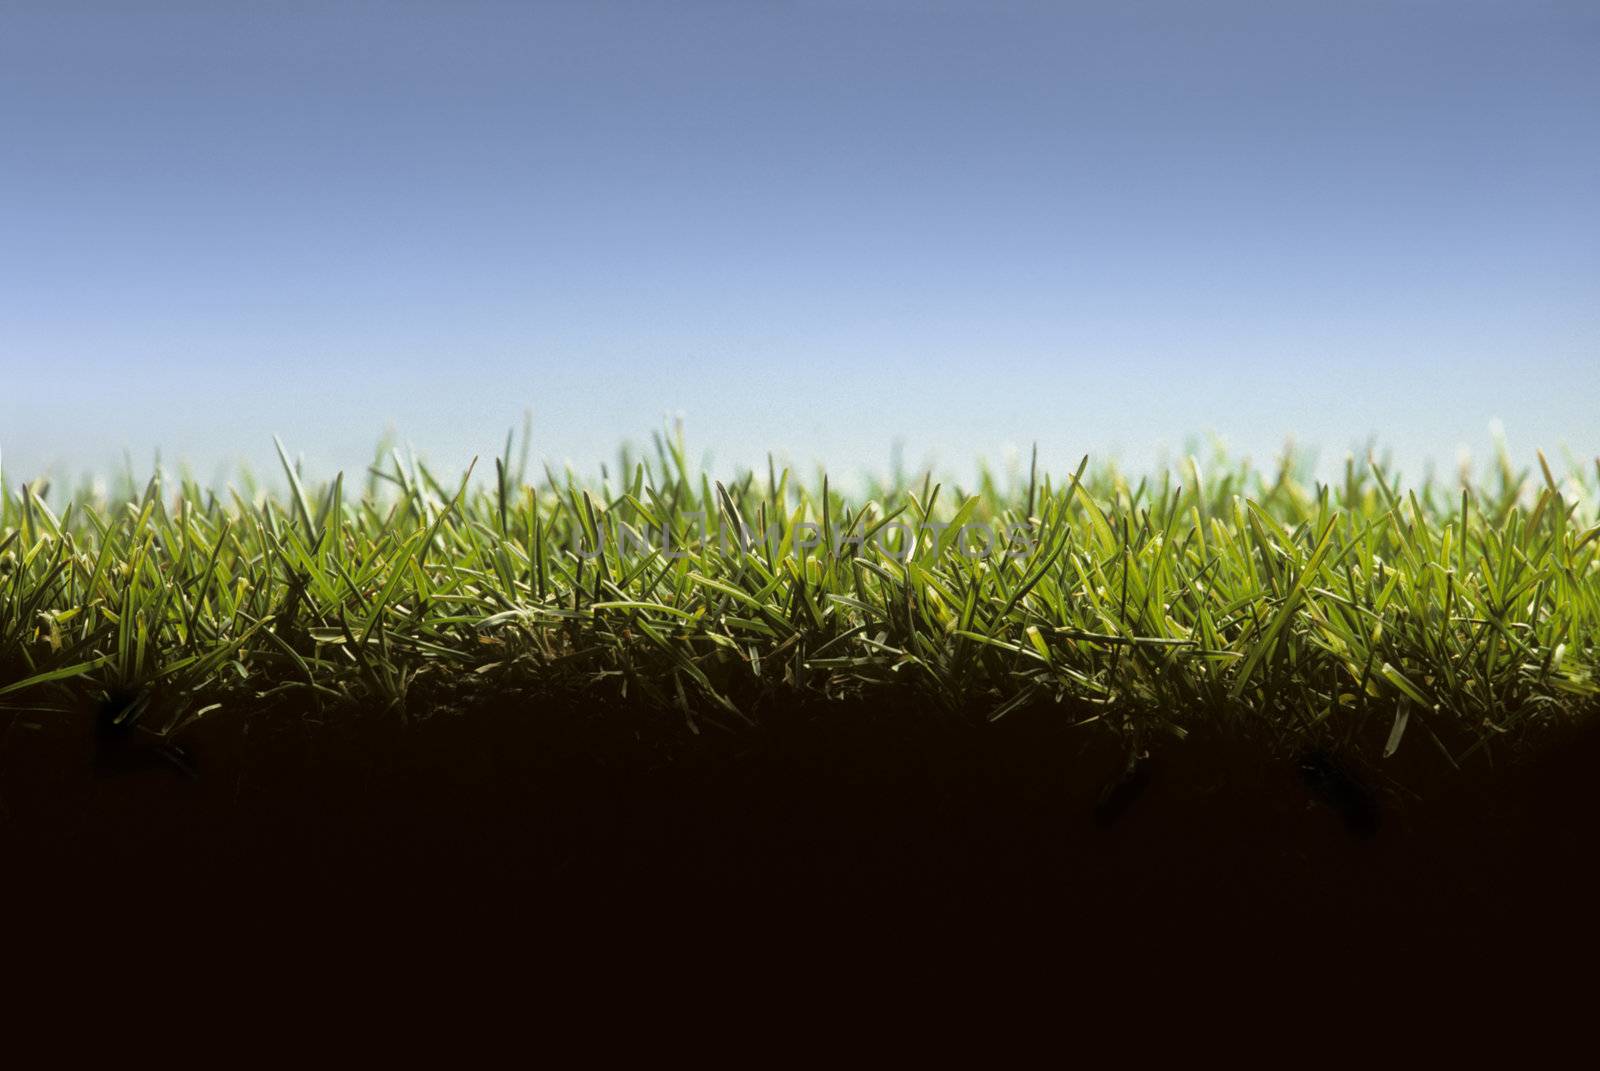 Cross section of lawn showing grass at ground level by Balefire9